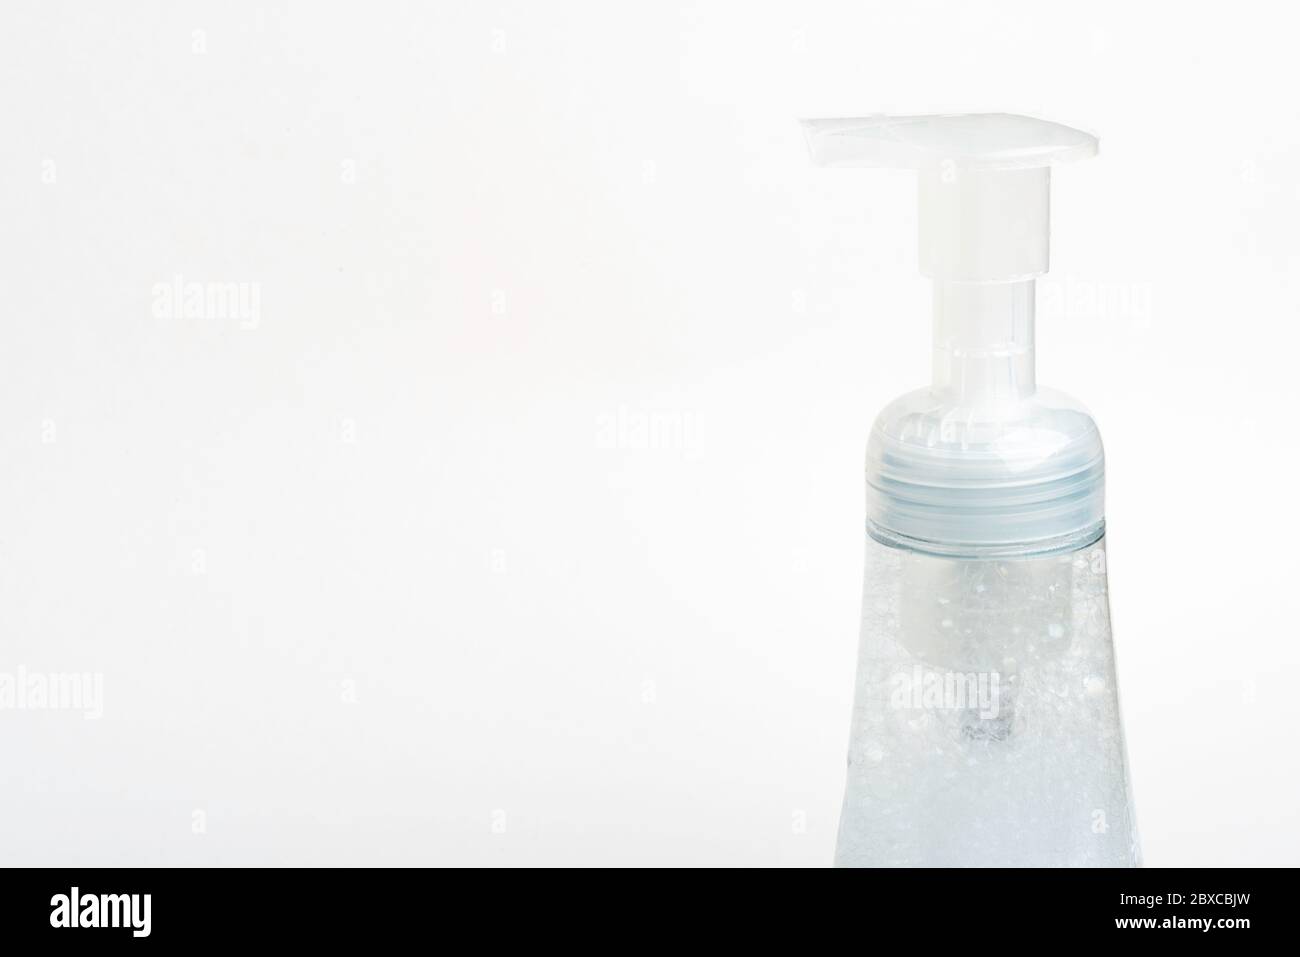 A close-up image of the translucent top pump and bottle of a foam soap plastic dispenser set on a white background. Stock Photo